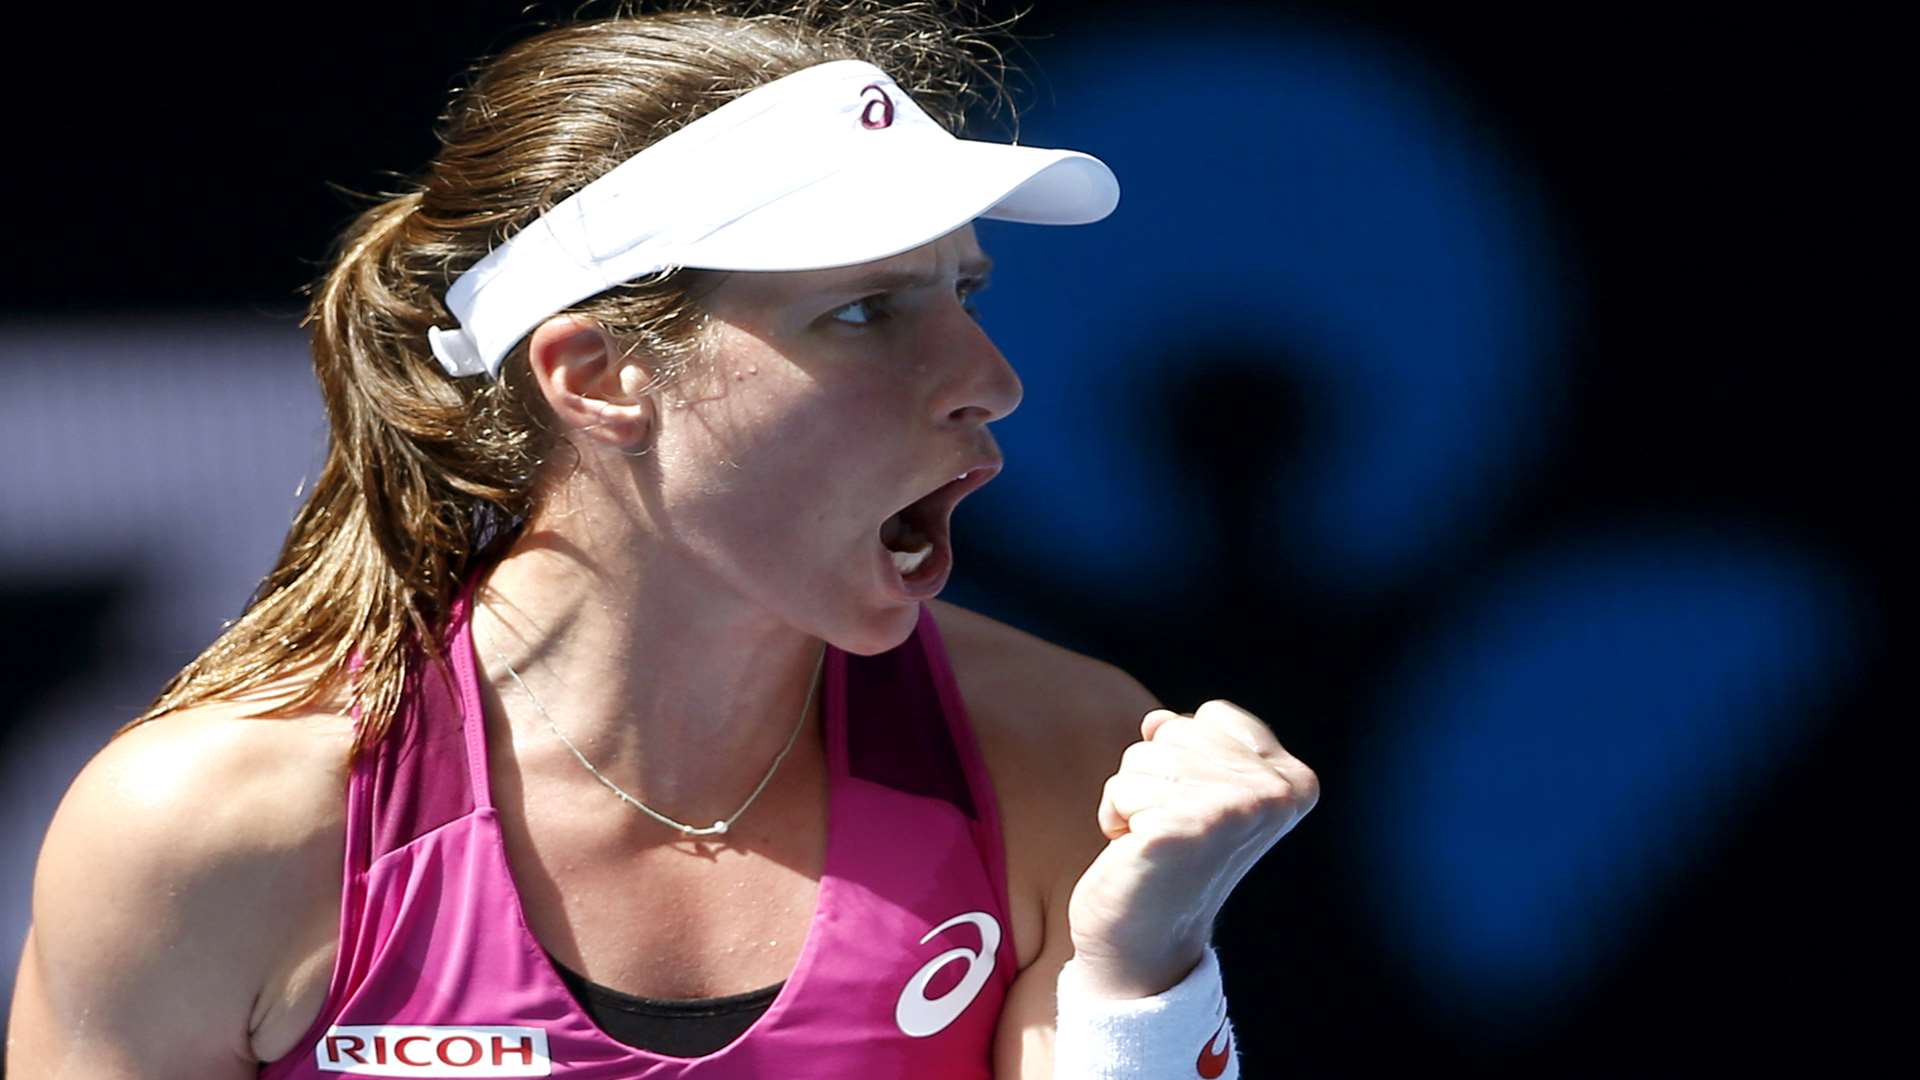 British No.1 Johanna Konta who has just reached a career-high 21 in the WTA rankings